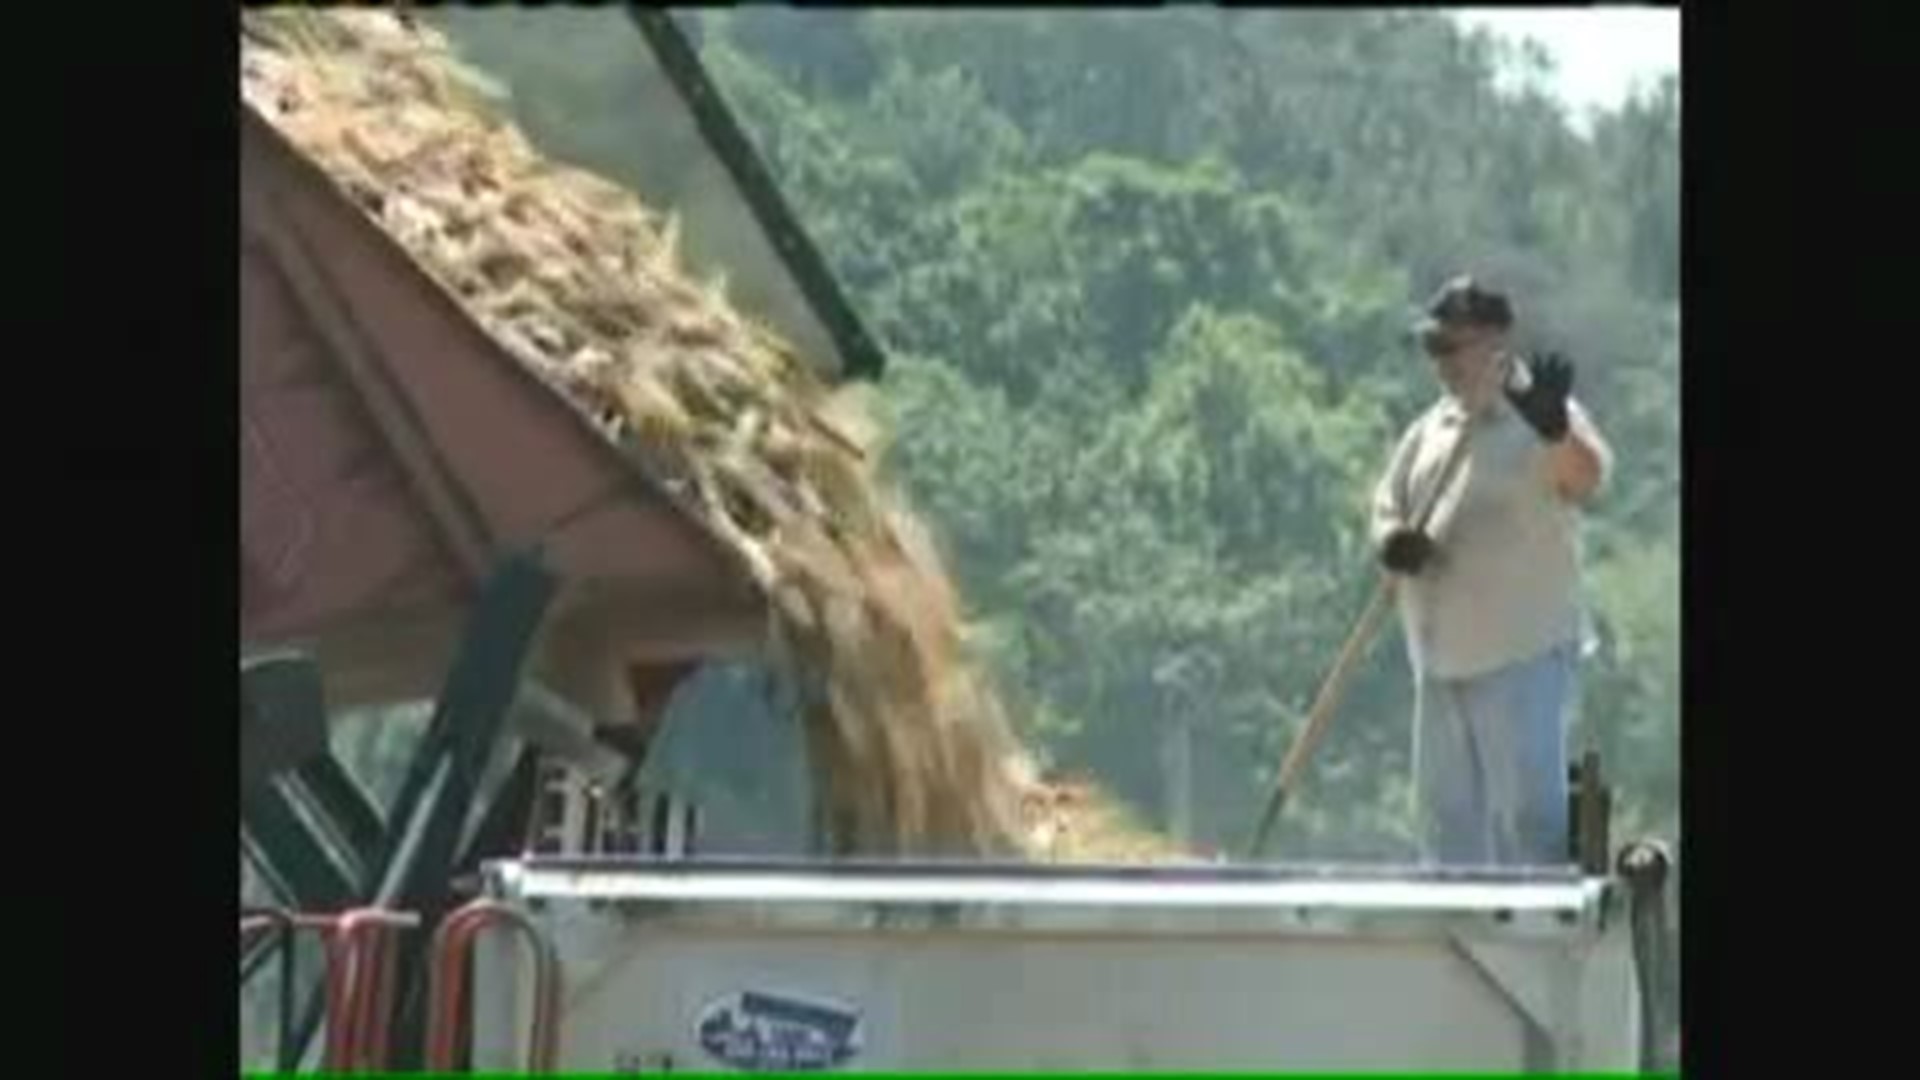 Early corn harvest is a way of life at Munson Hybrids